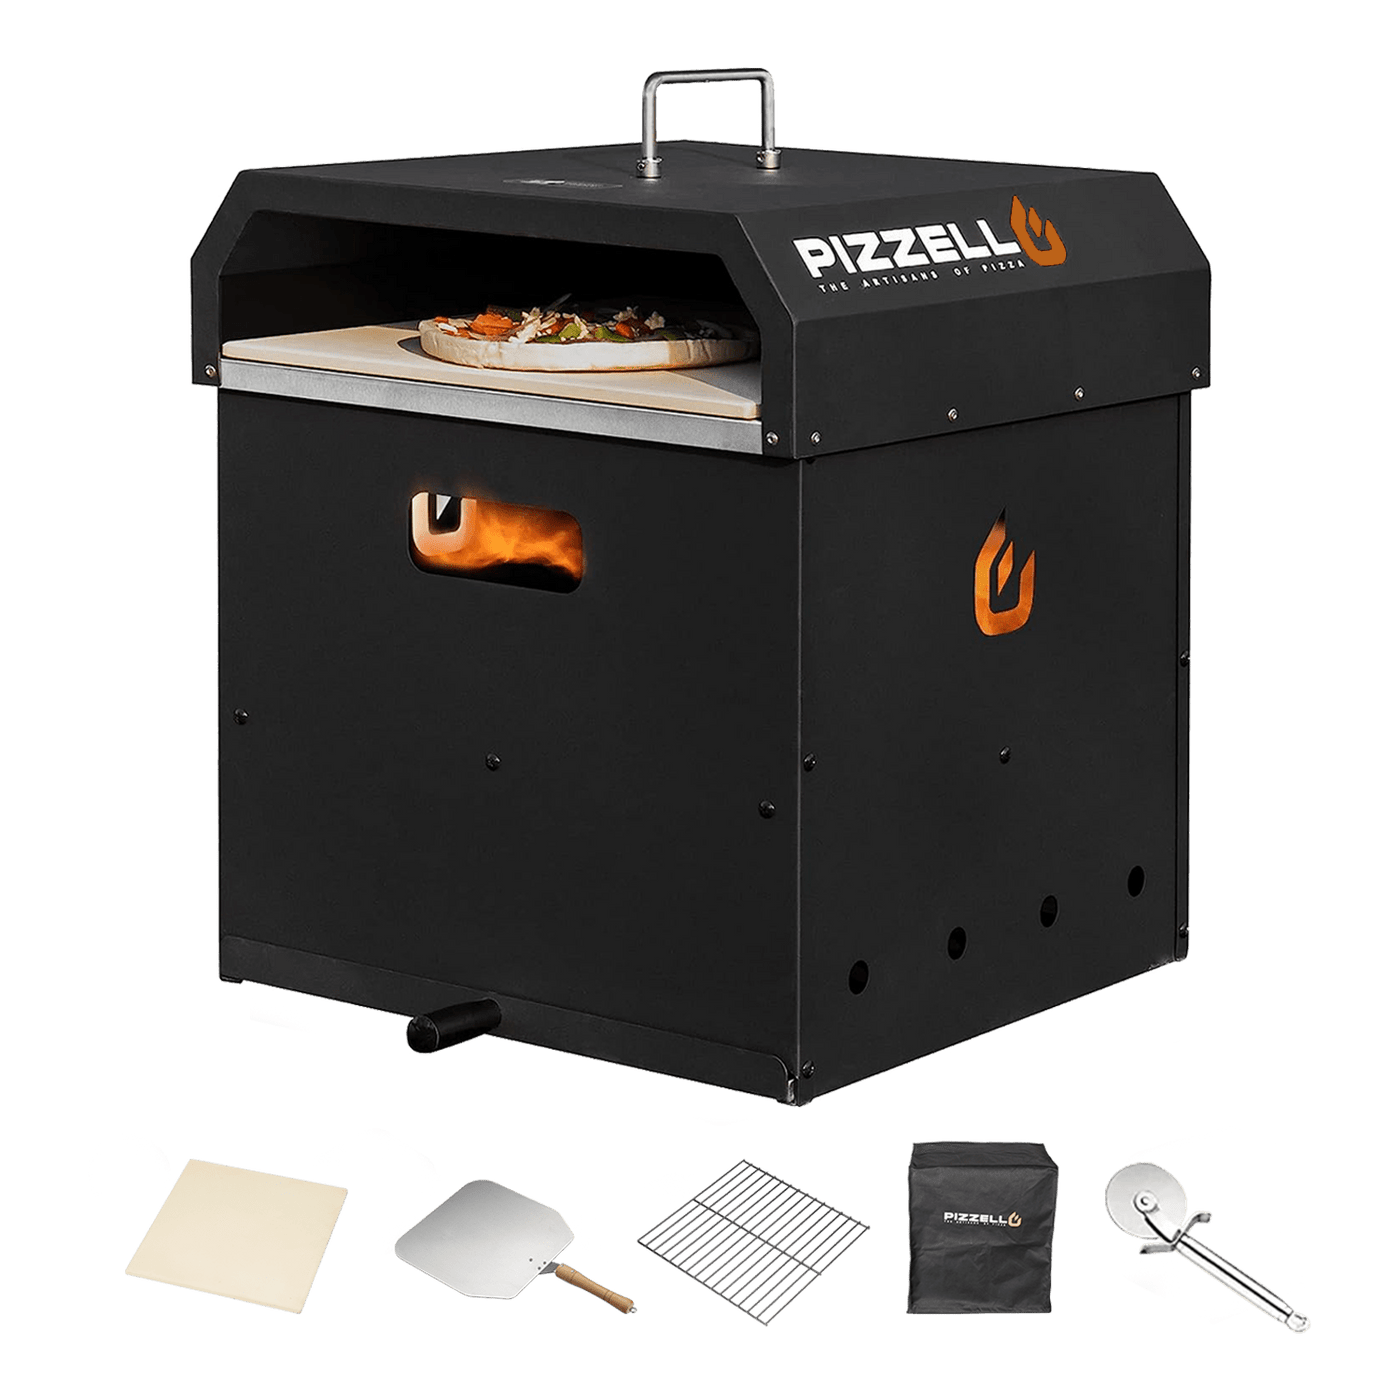 Pizzello Gusto - 4 in 1 Outdoor Pizza Oven - Pizzello